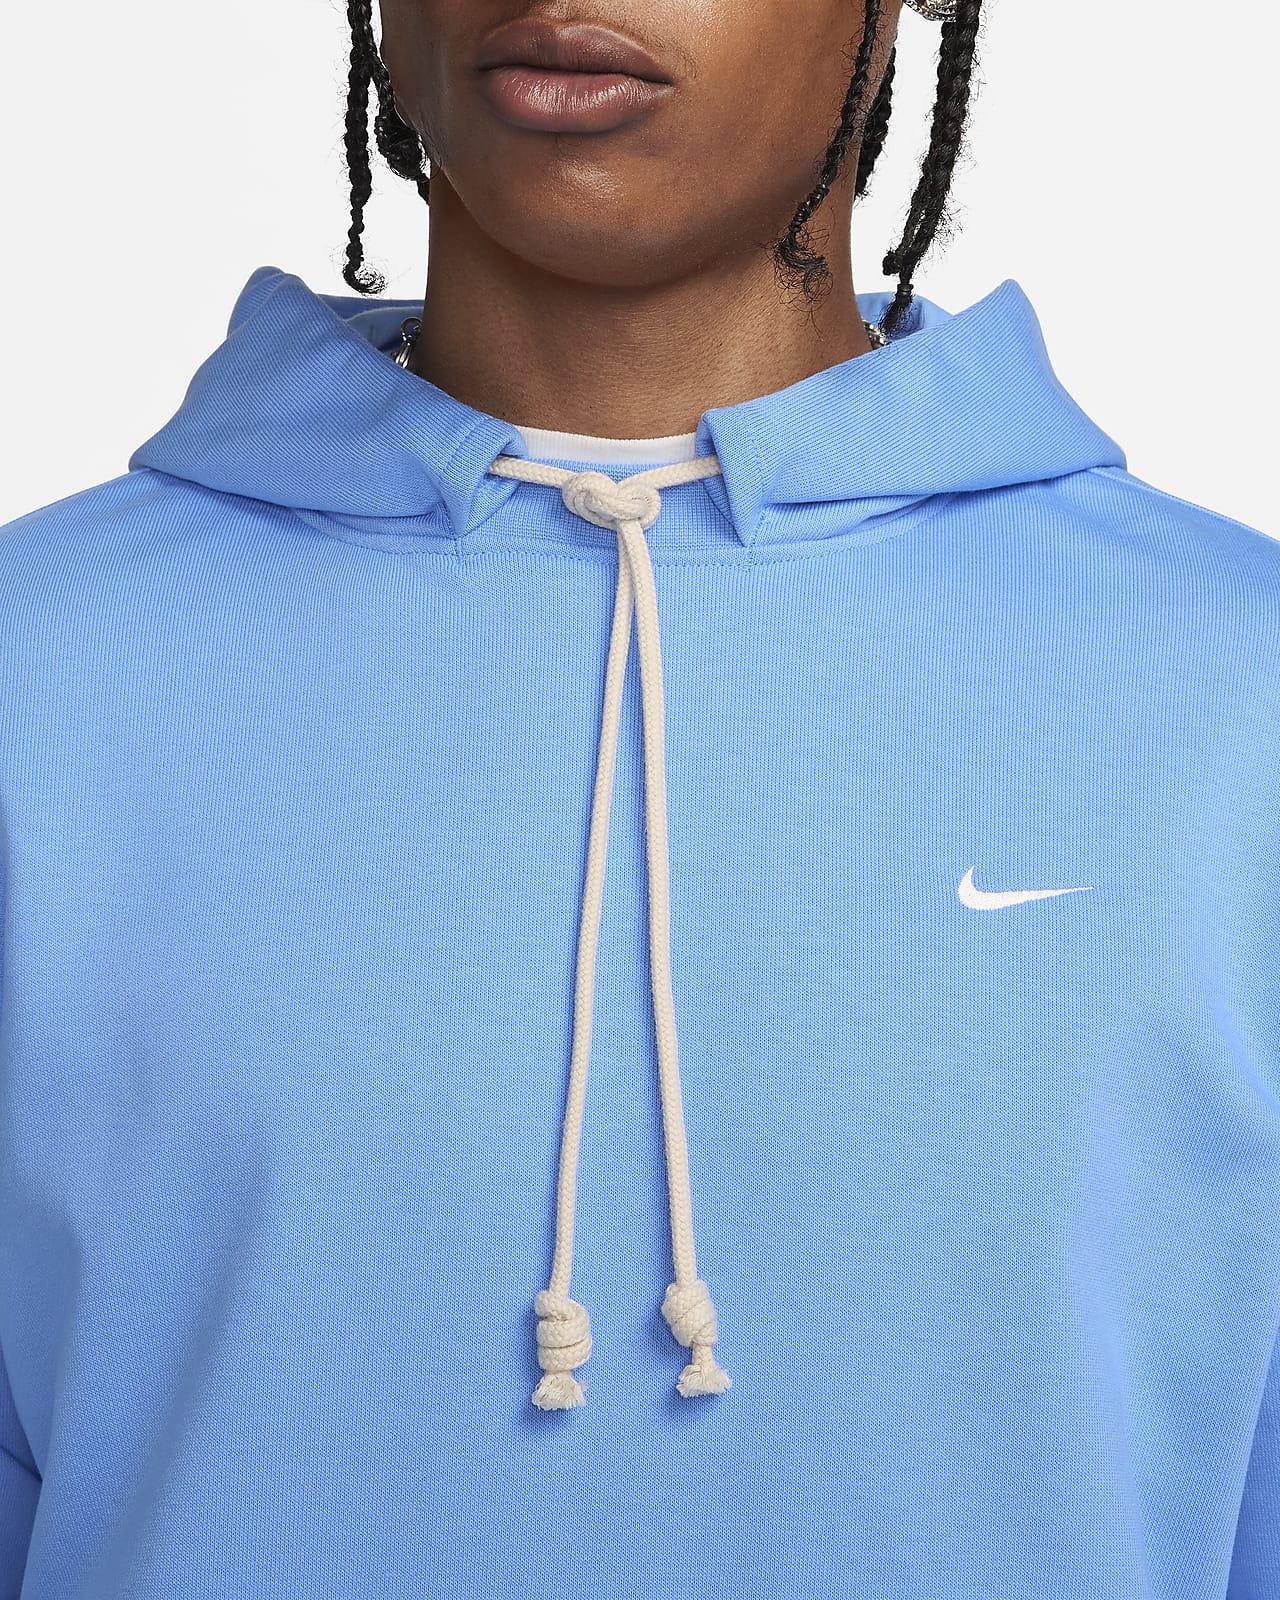 Nike Men's Standard Issue Dri-FIT Full-Zip Basketball Hoodie in Blue, Size: XL | DQ5816-412